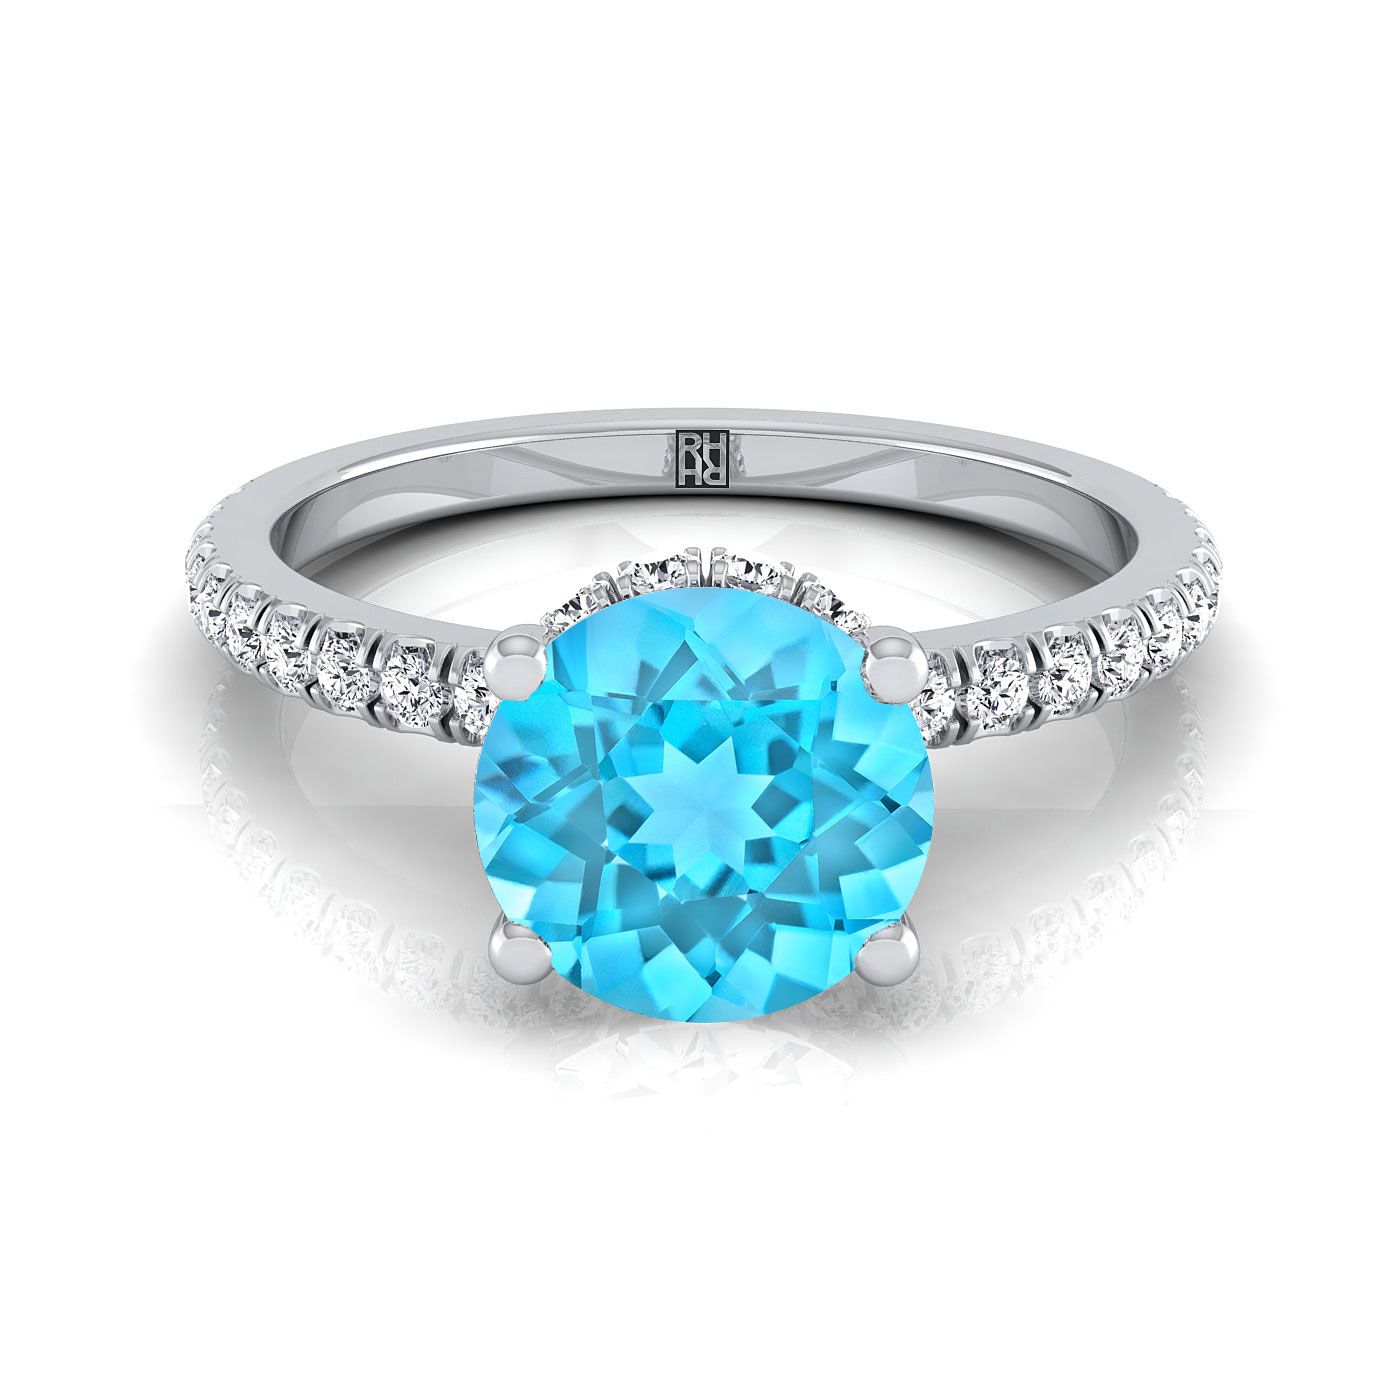 14K White Gold Round Brilliant Swiss Blue Topaz Secret Diamond Halo French Pave Solitaire Engagement Ring -1/3ctw